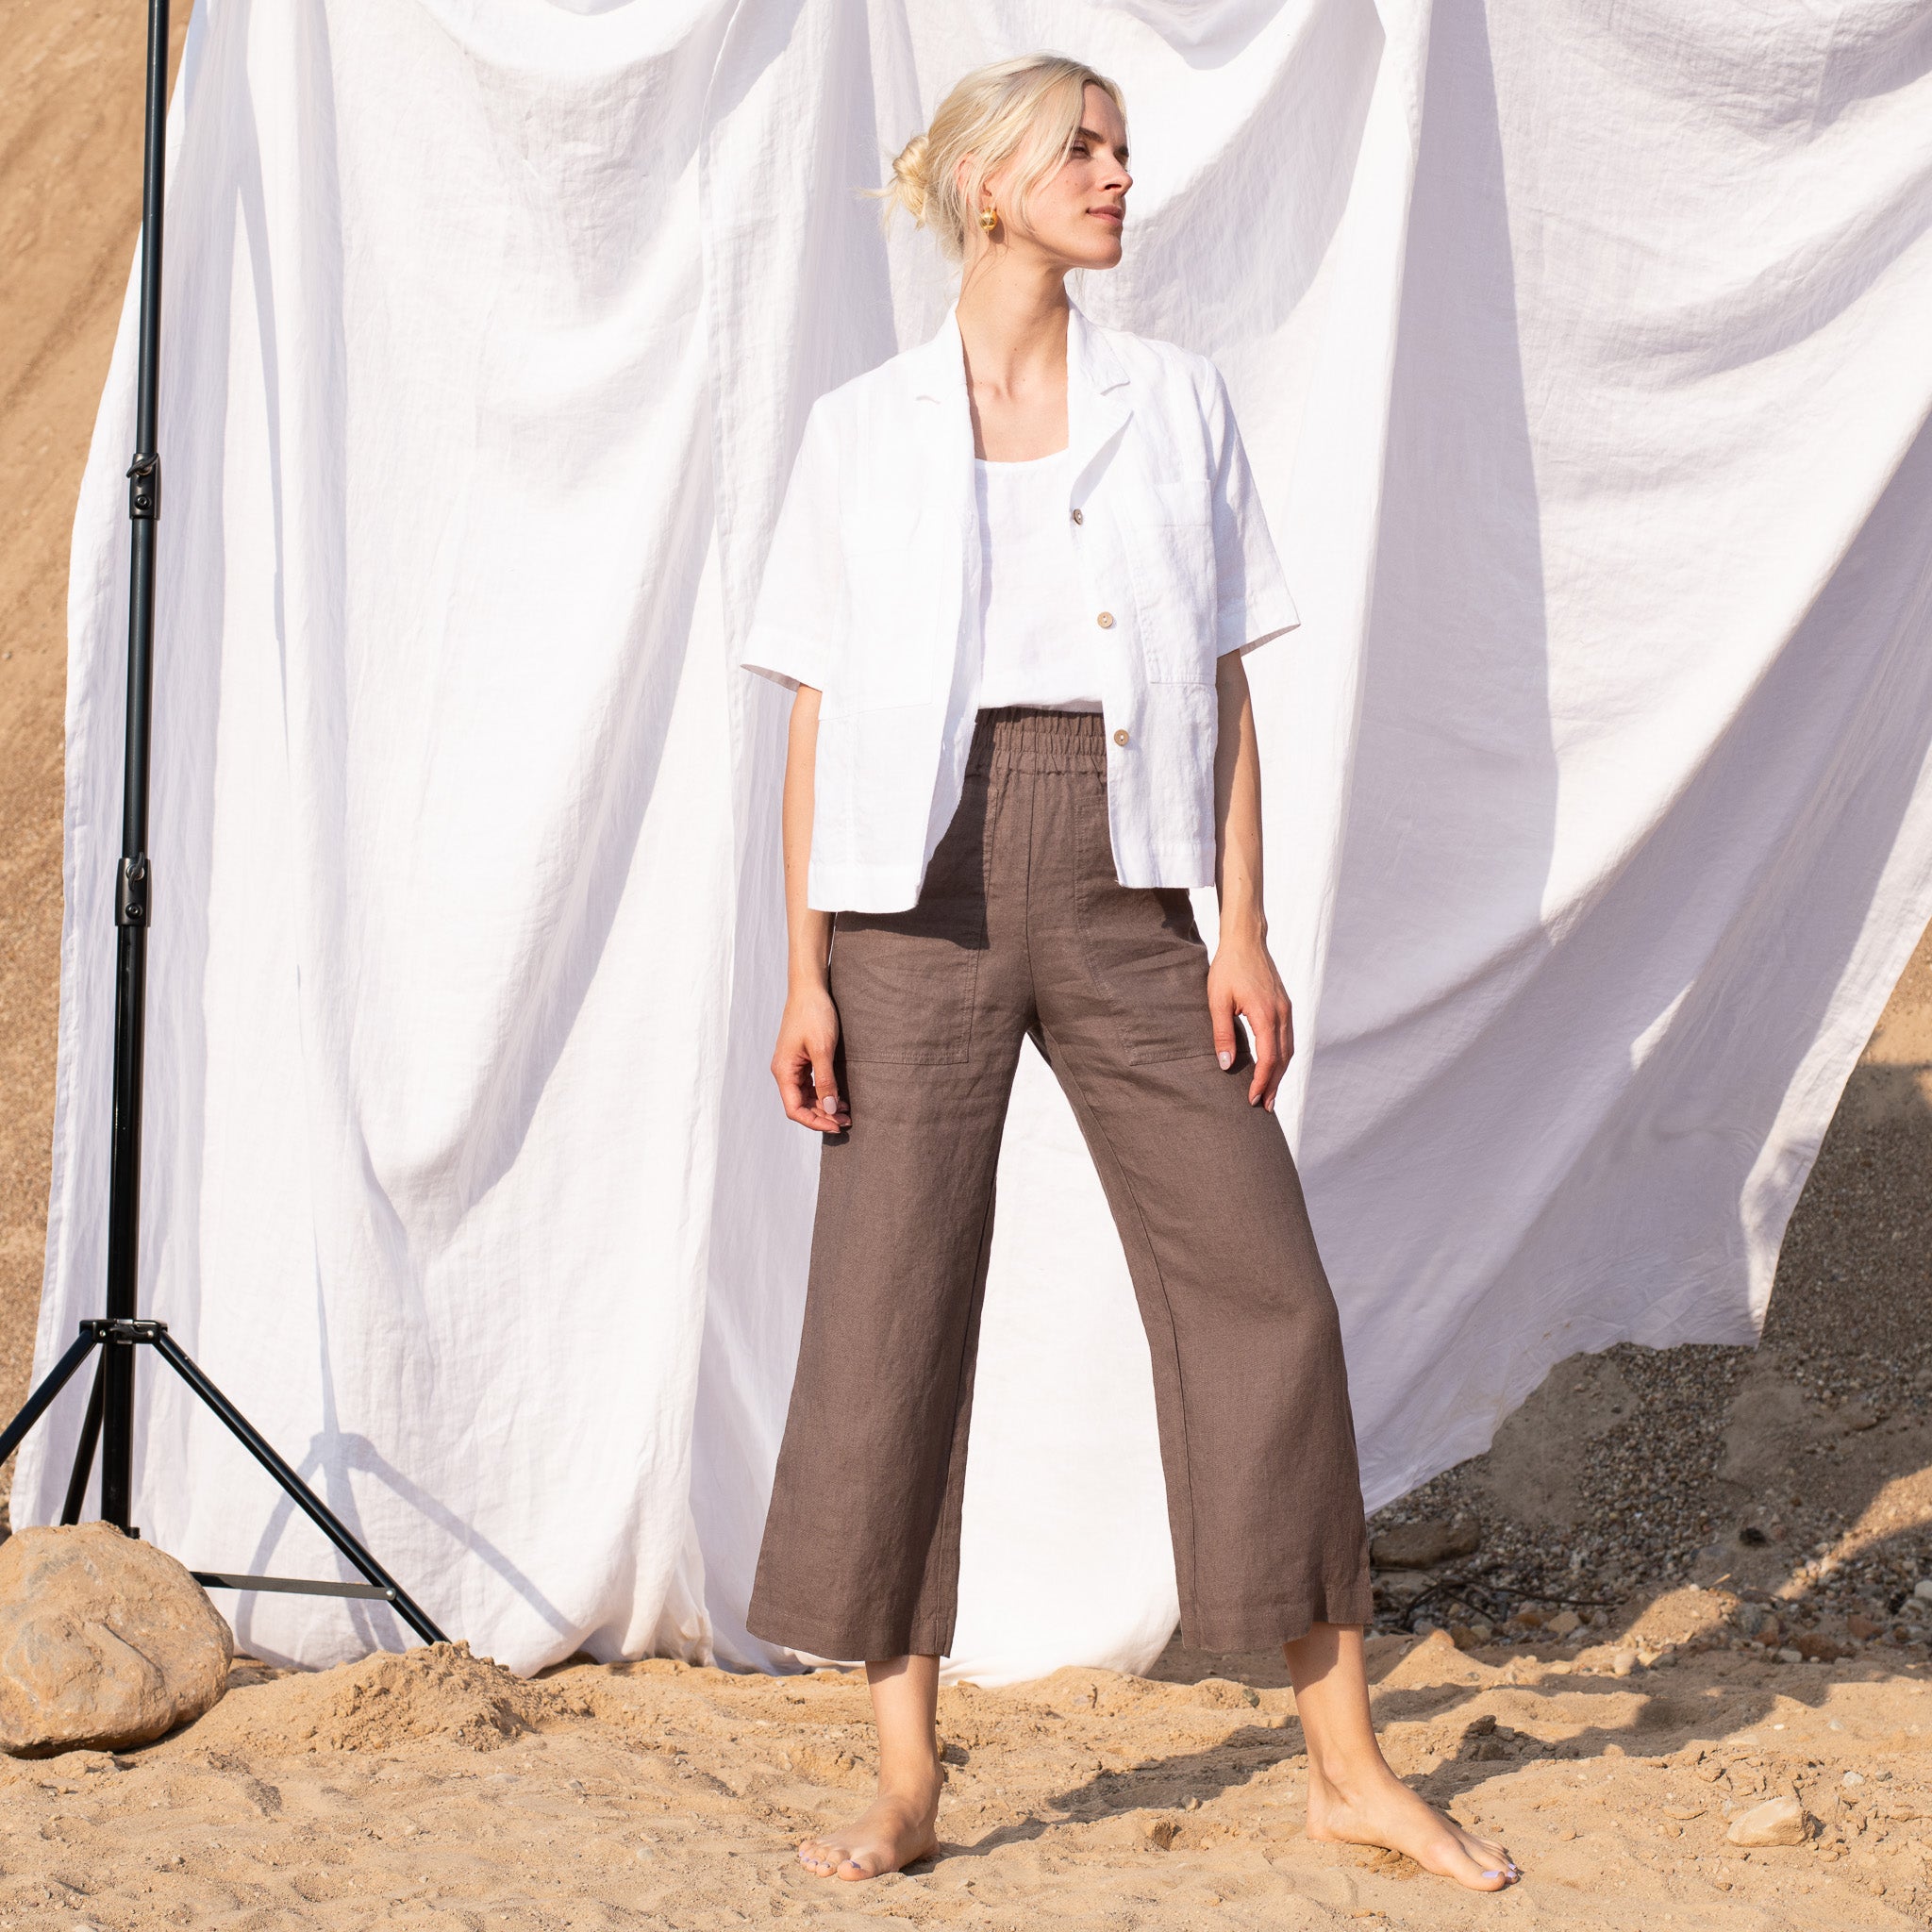 PUGLIA fitted linen pants in Chocolate